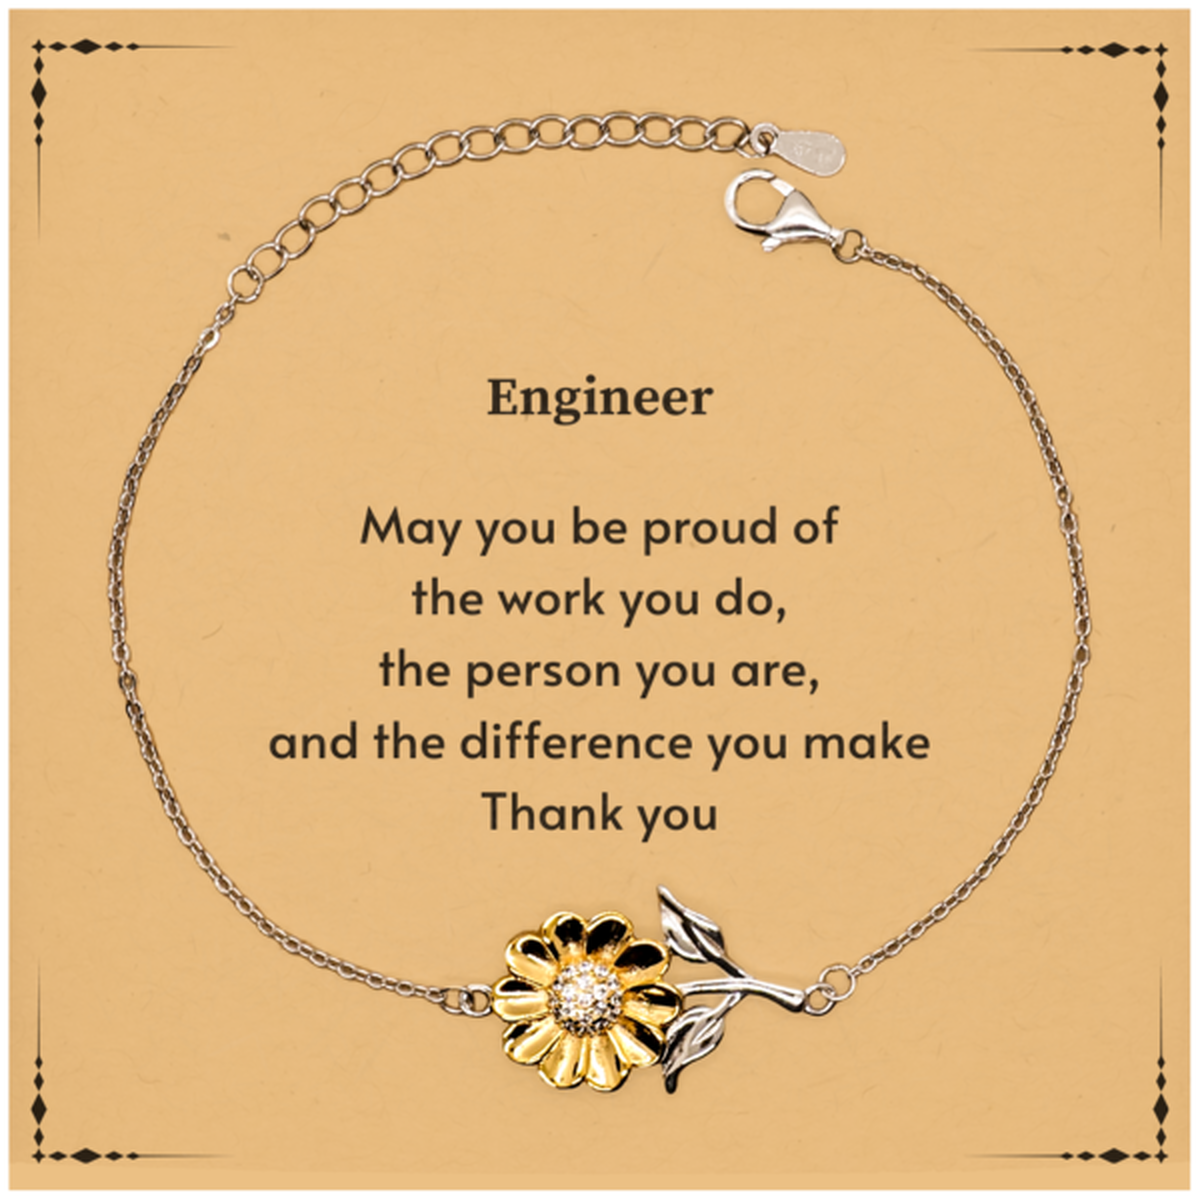 Heartwarming Sunflower Bracelet Retirement Coworkers Gifts for Engineer, Engineer May You be proud of the work you do, the person you are Gifts for Boss Men Women Friends